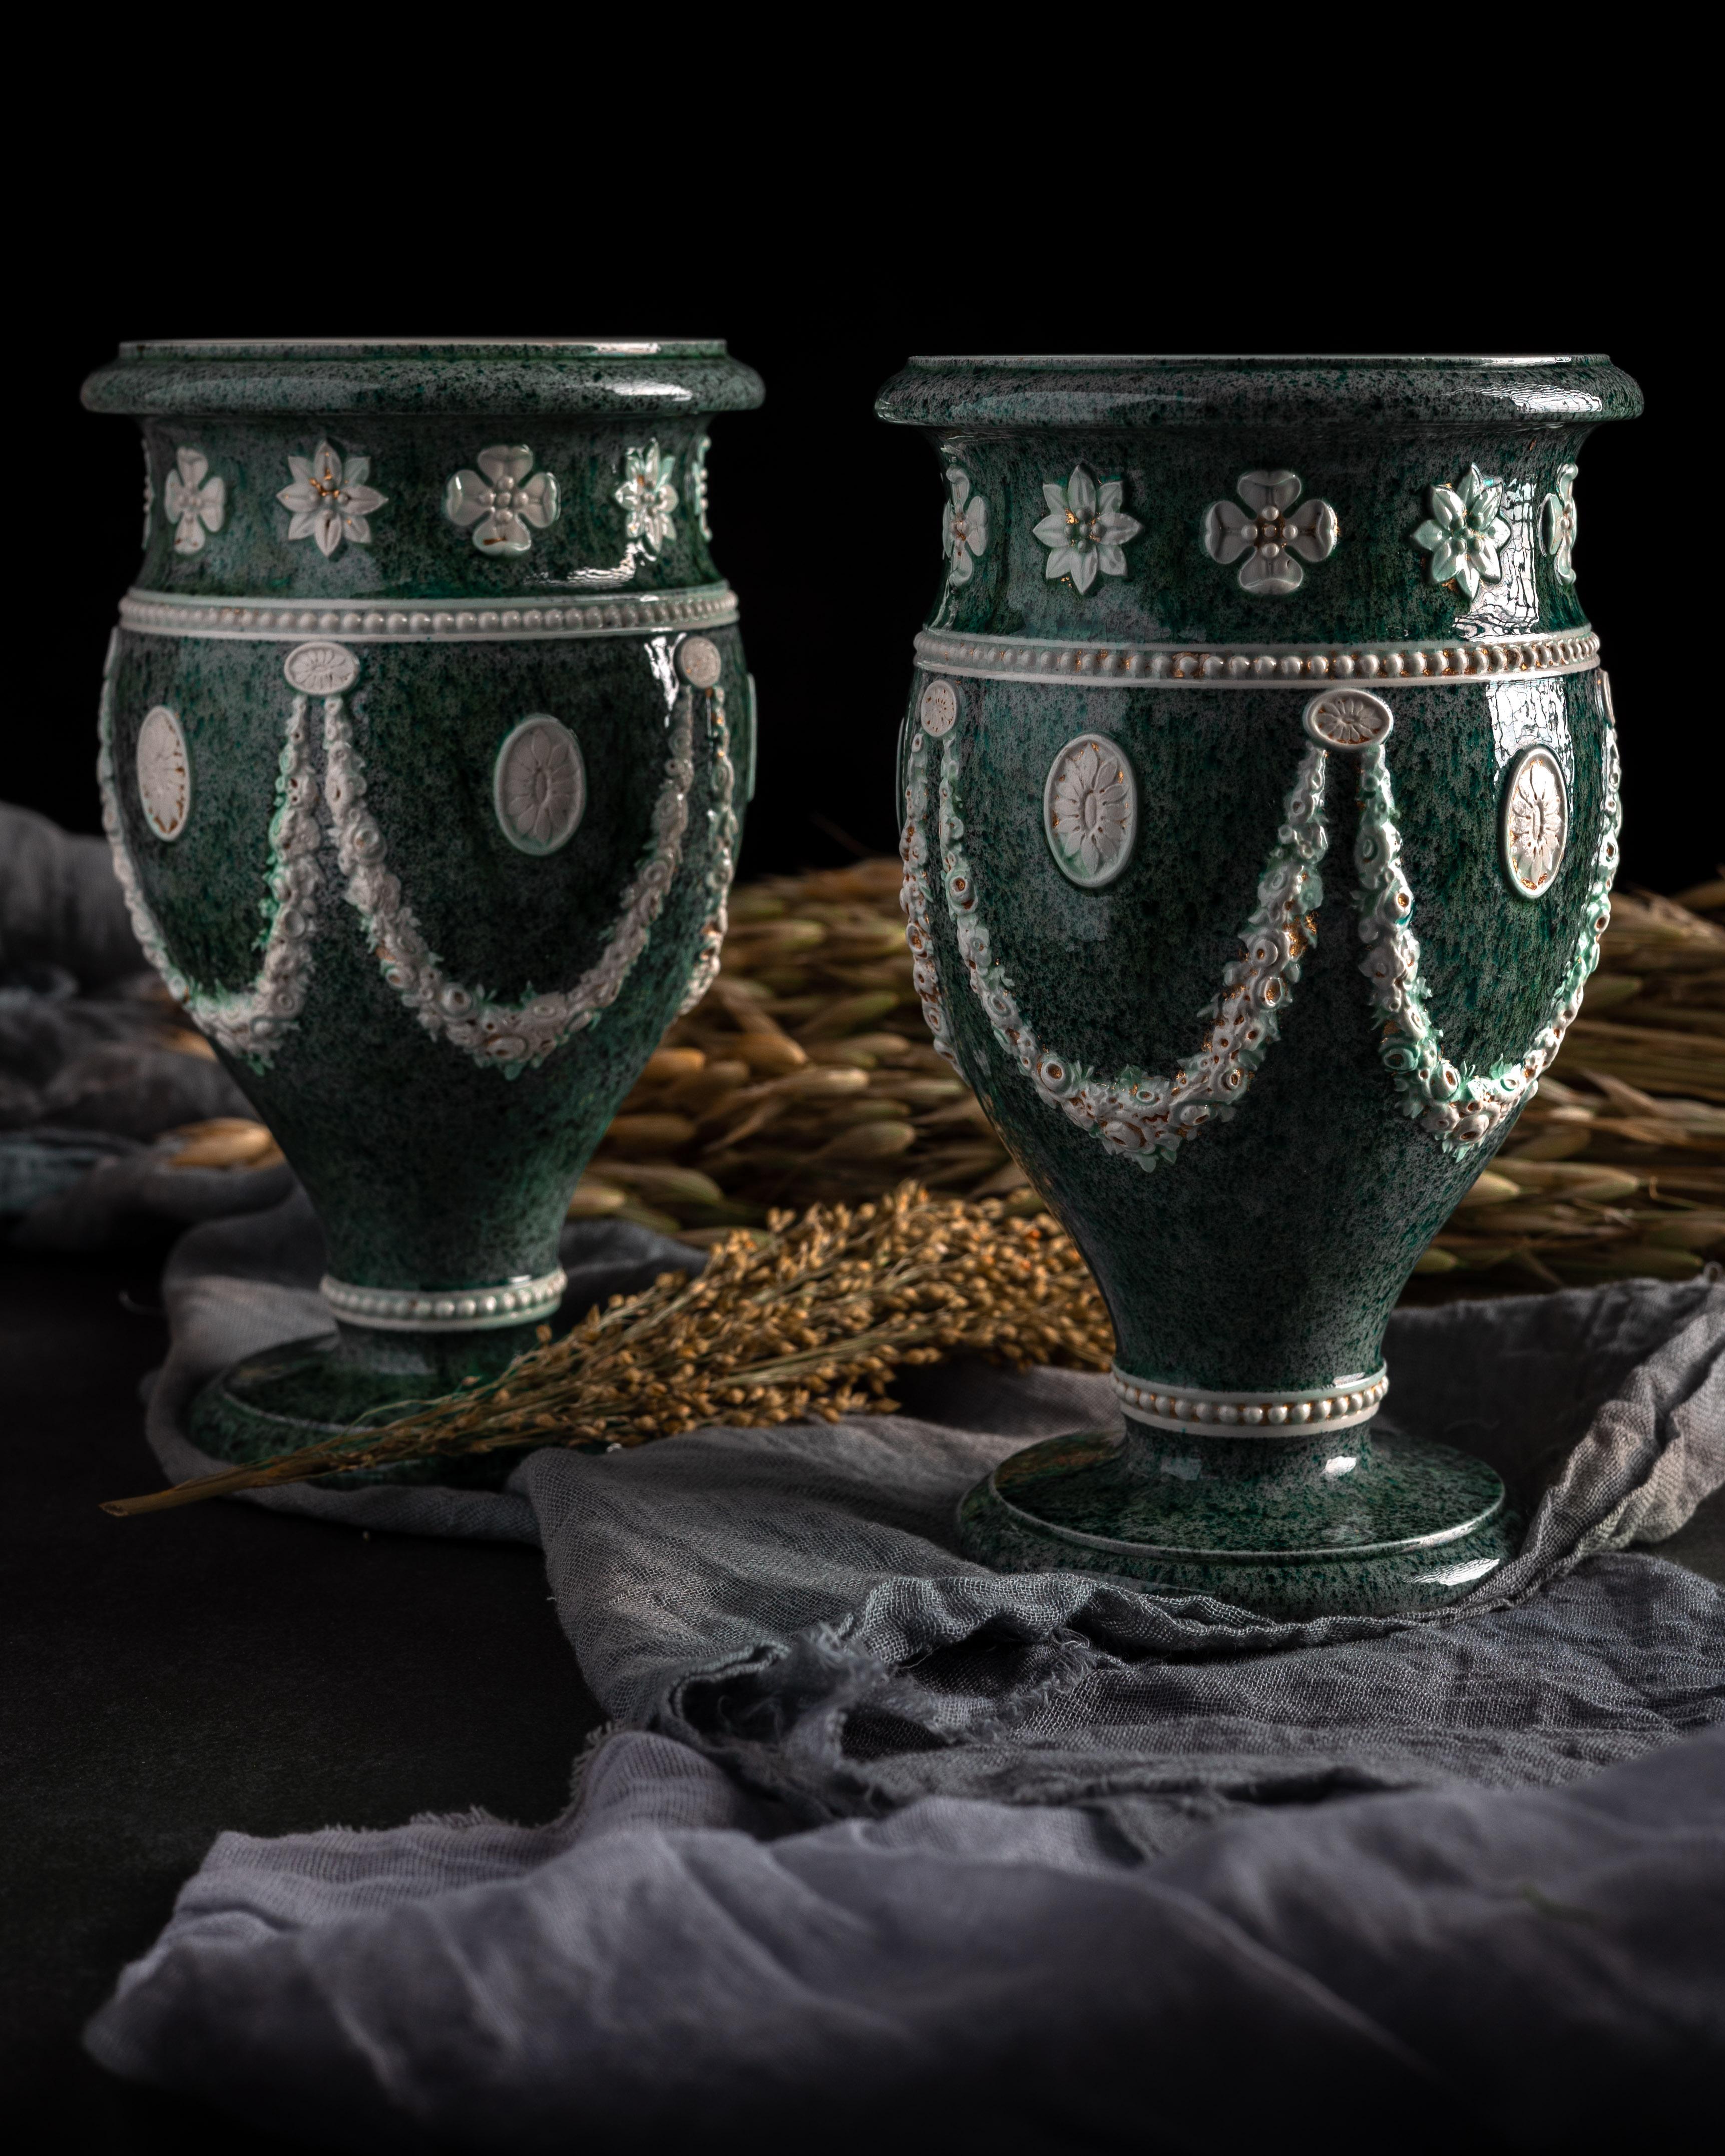 A pair of early Wedgwood pearlware urns with faux porphyry glaze, made circa 1785.

Josiah Wedgwood developed his pearlware glaze in 1779 as a white-ware alternative to his wildly popular creamware, or ‘Queen’s ware.’ The glaze, named “Pearl